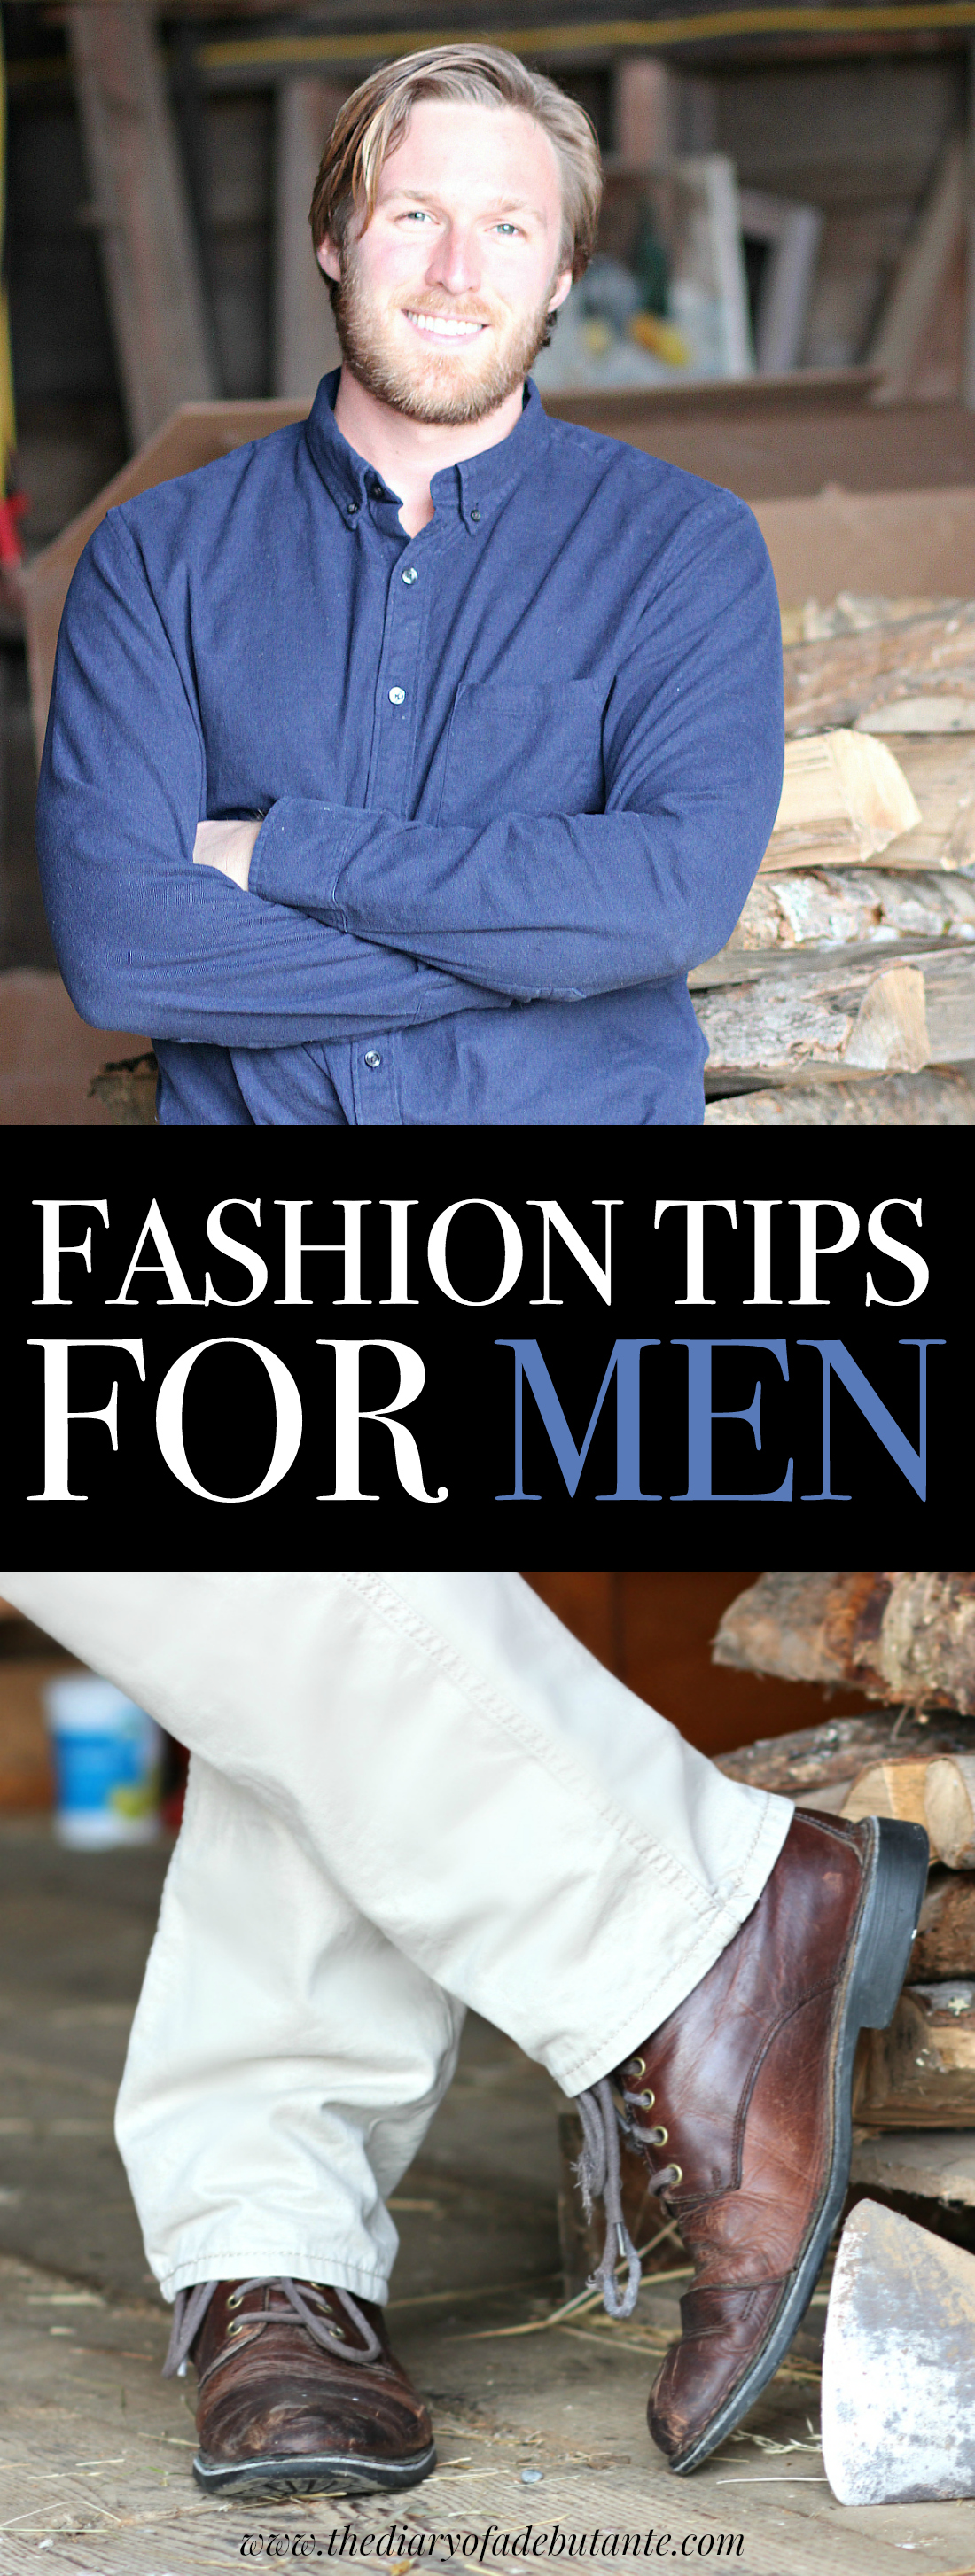 5 simple fashion tips for men